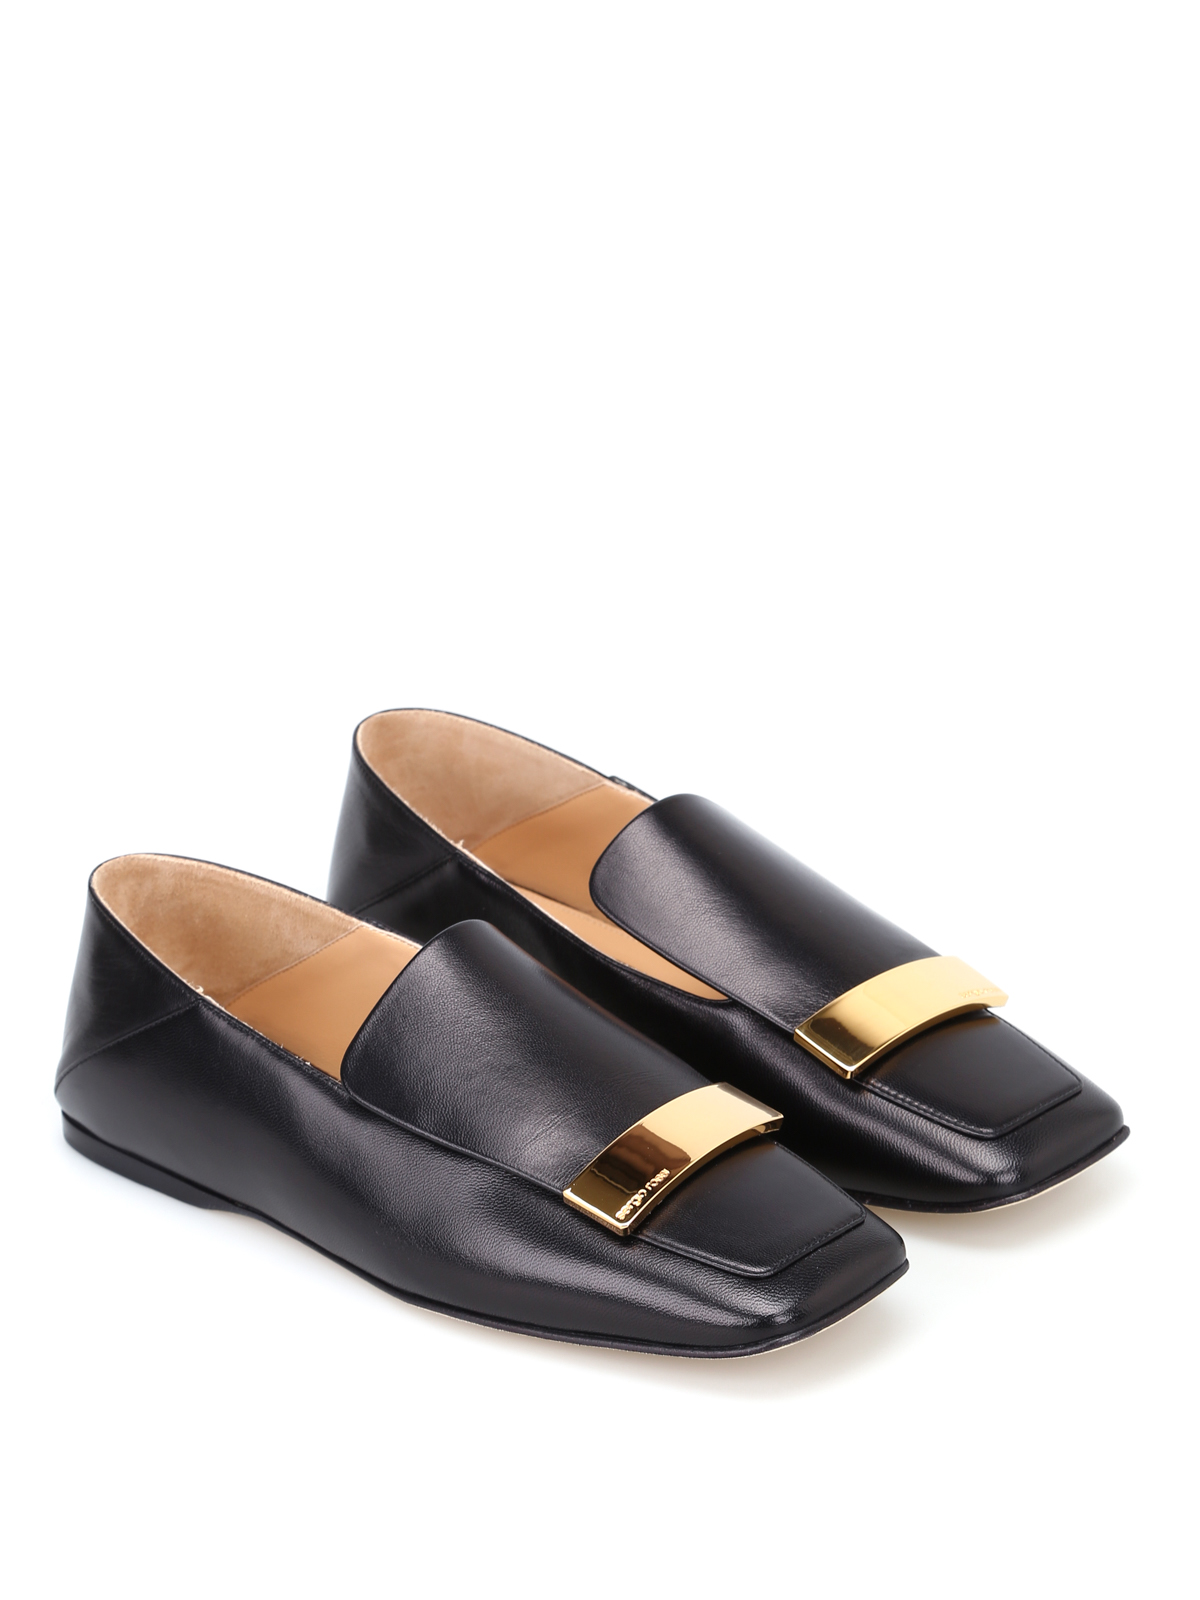 Loafers & Slippers Sergio Rossi - sr1 napa leather black flat ...